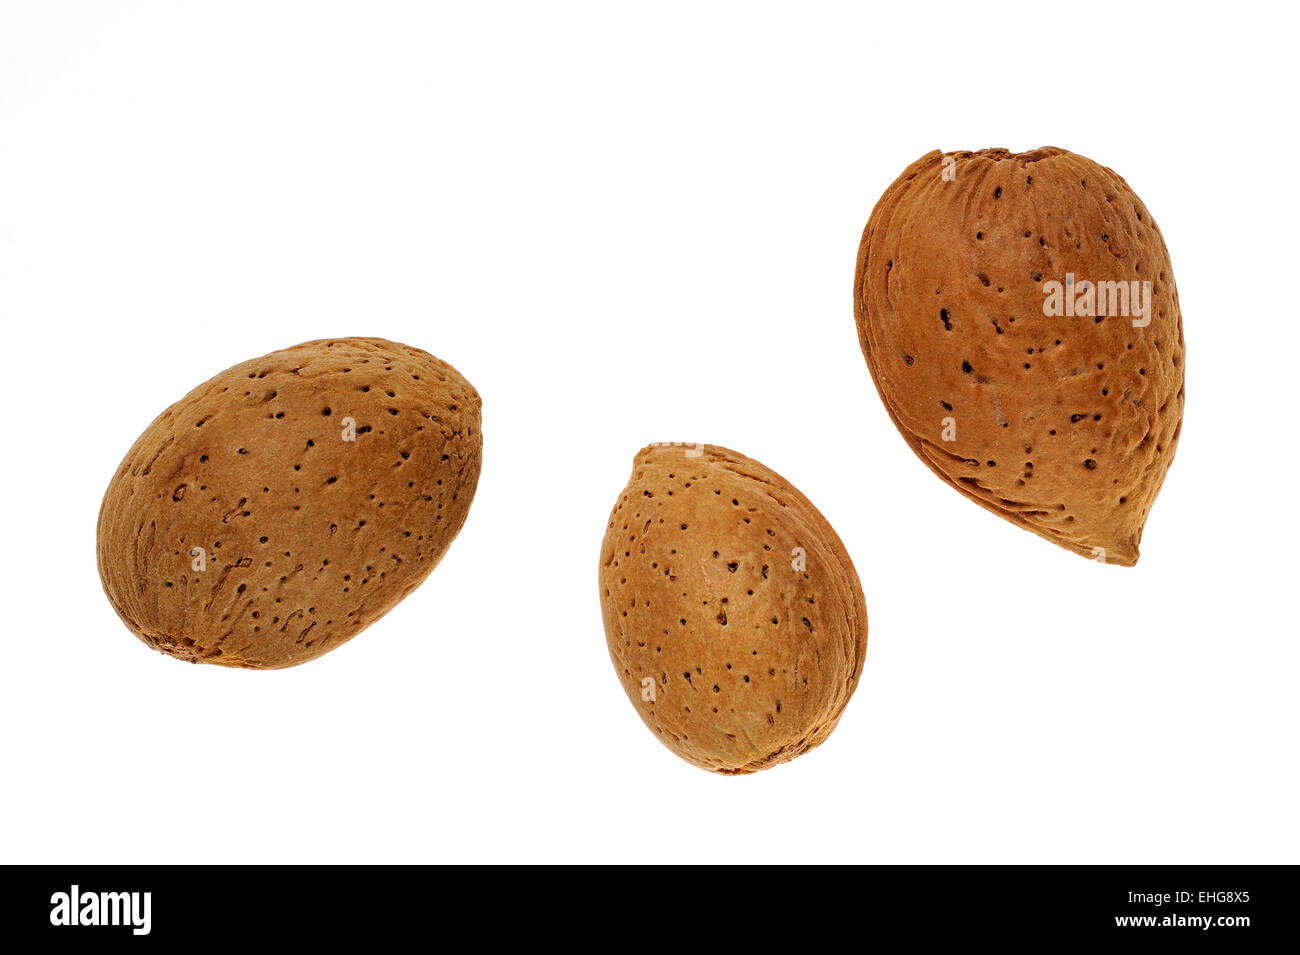 Close up of three unshelled almond nuts (Prunus dulcis) in shell against white background Stock Photo